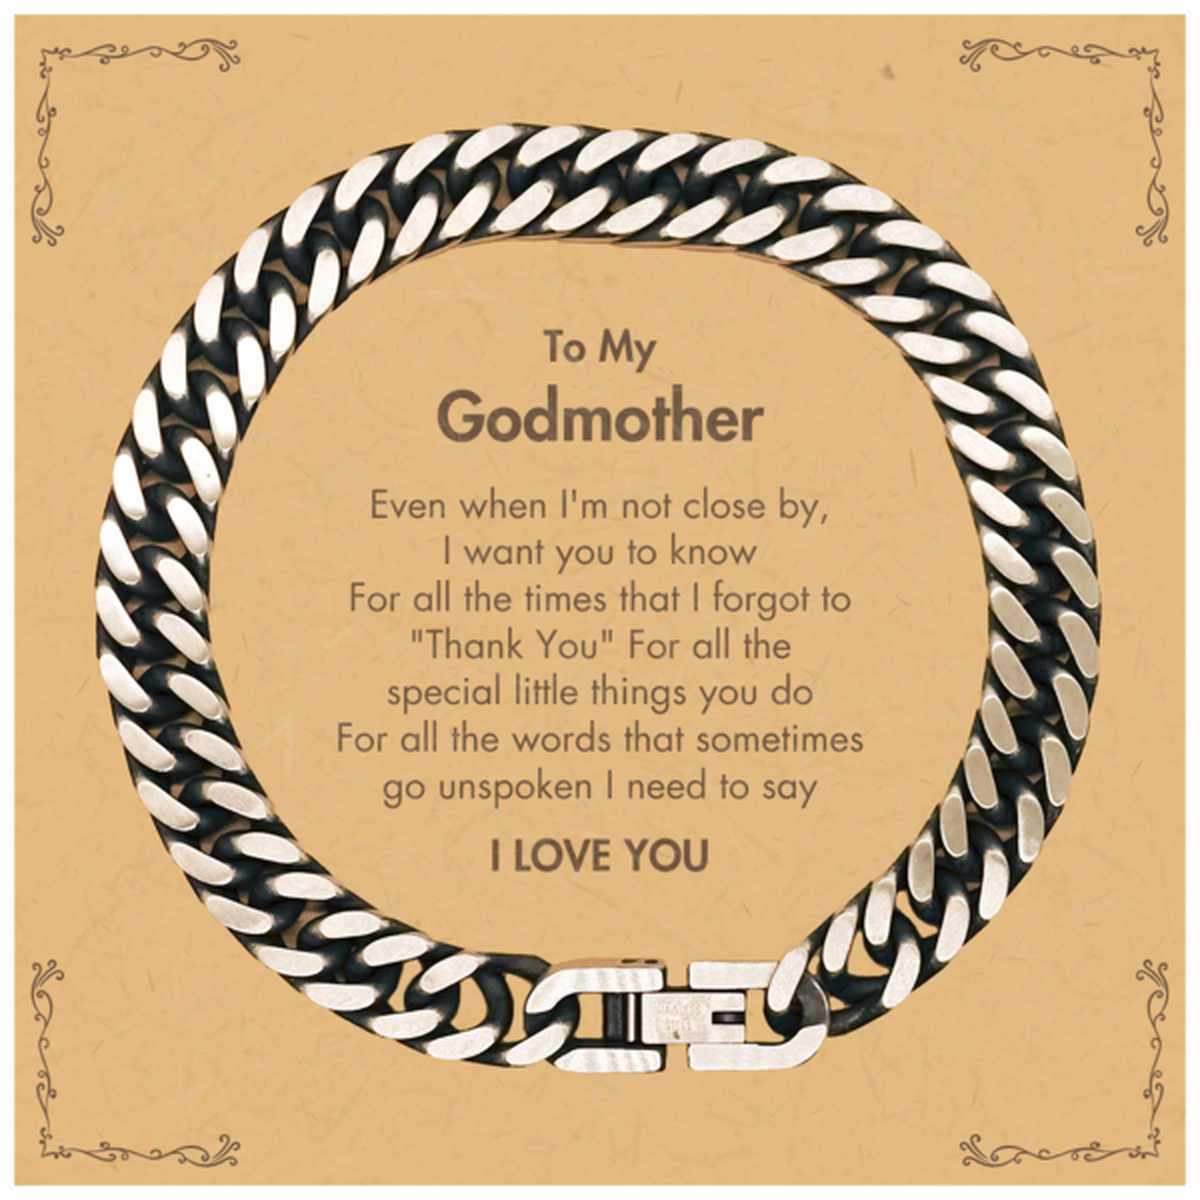 Thank You Gifts for Godmother, Keepsake Cuban Link Chain Bracelet Gifts for Godmother Birthday Mother's day Father's Day Godmother For all the words That sometimes go unspoken I need to say I LOVE YOU